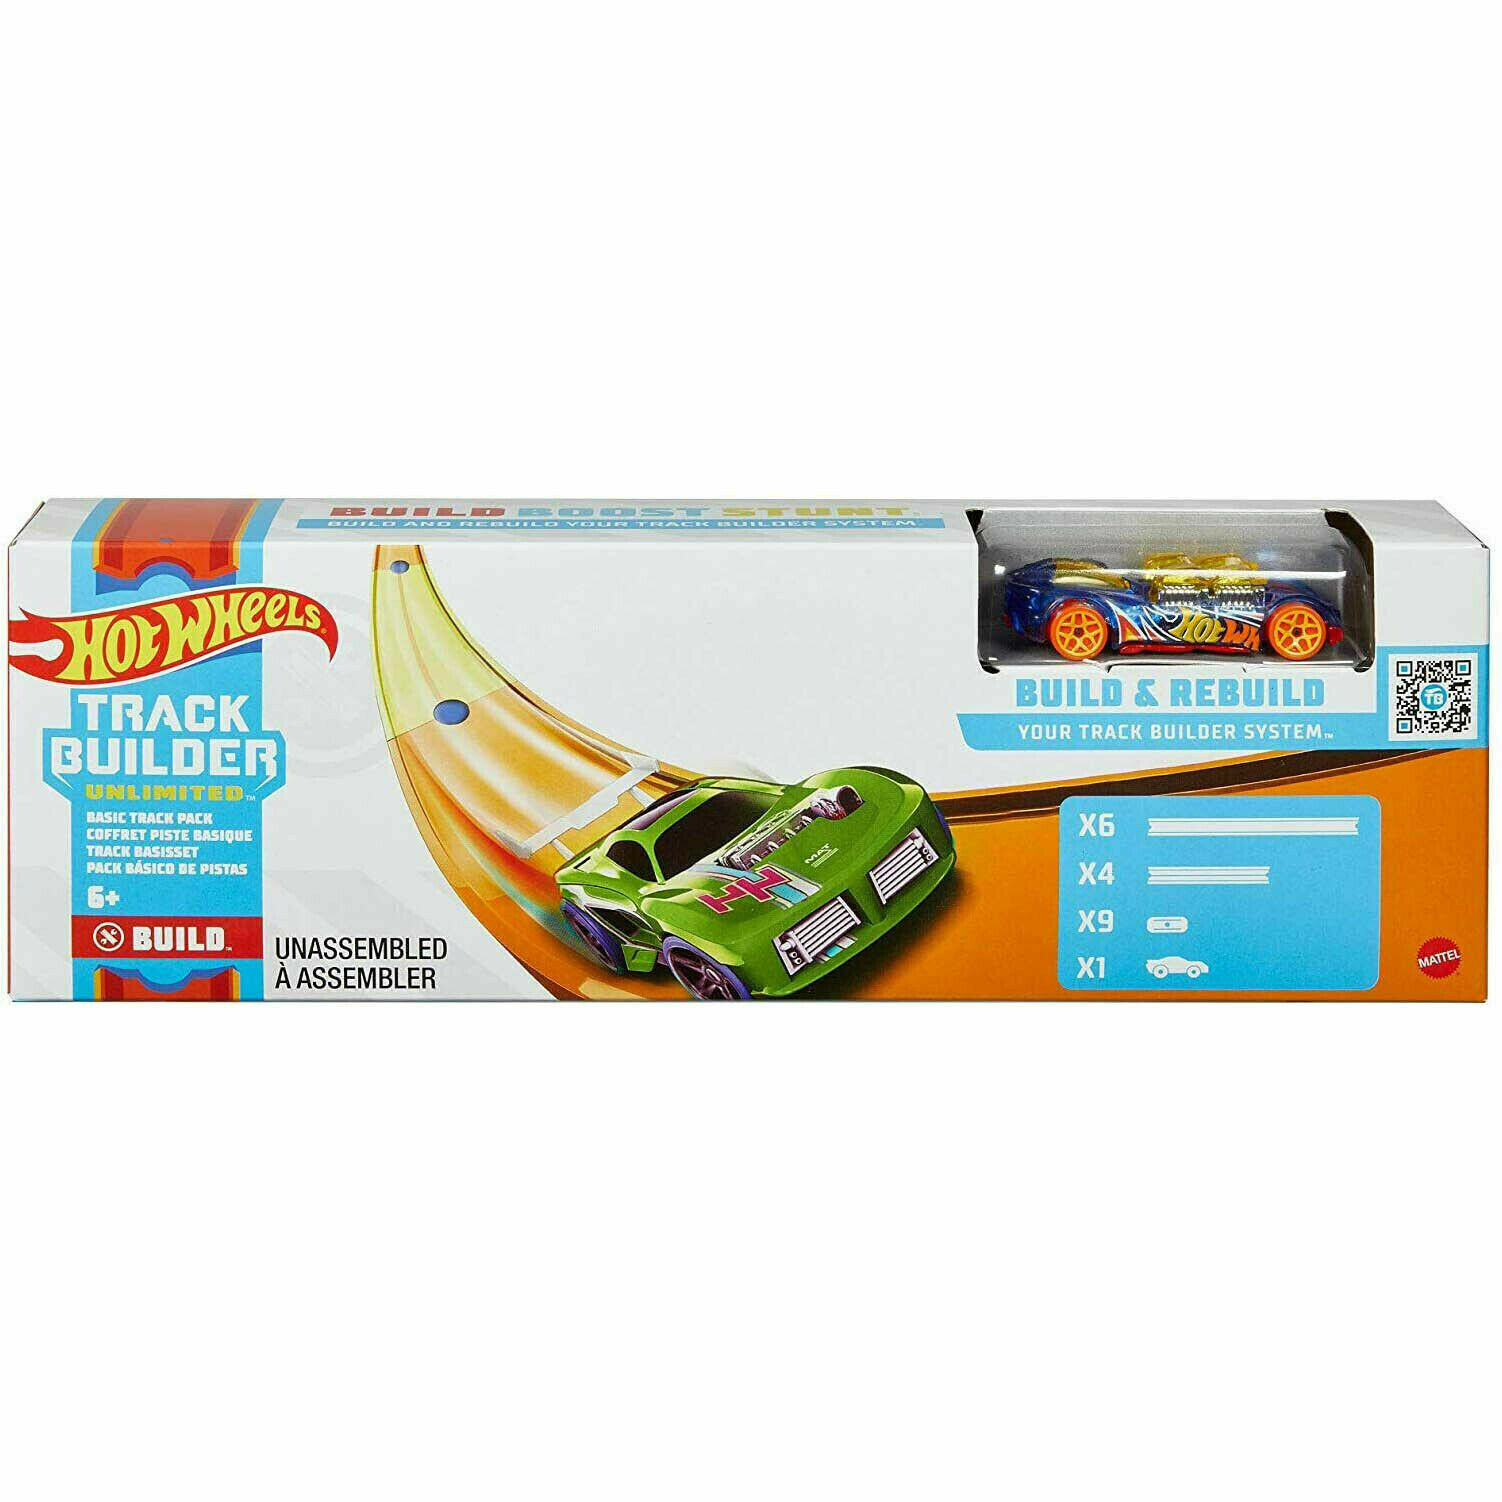 NEW Rare Hot Track Builder Unlimited Pack | eBay